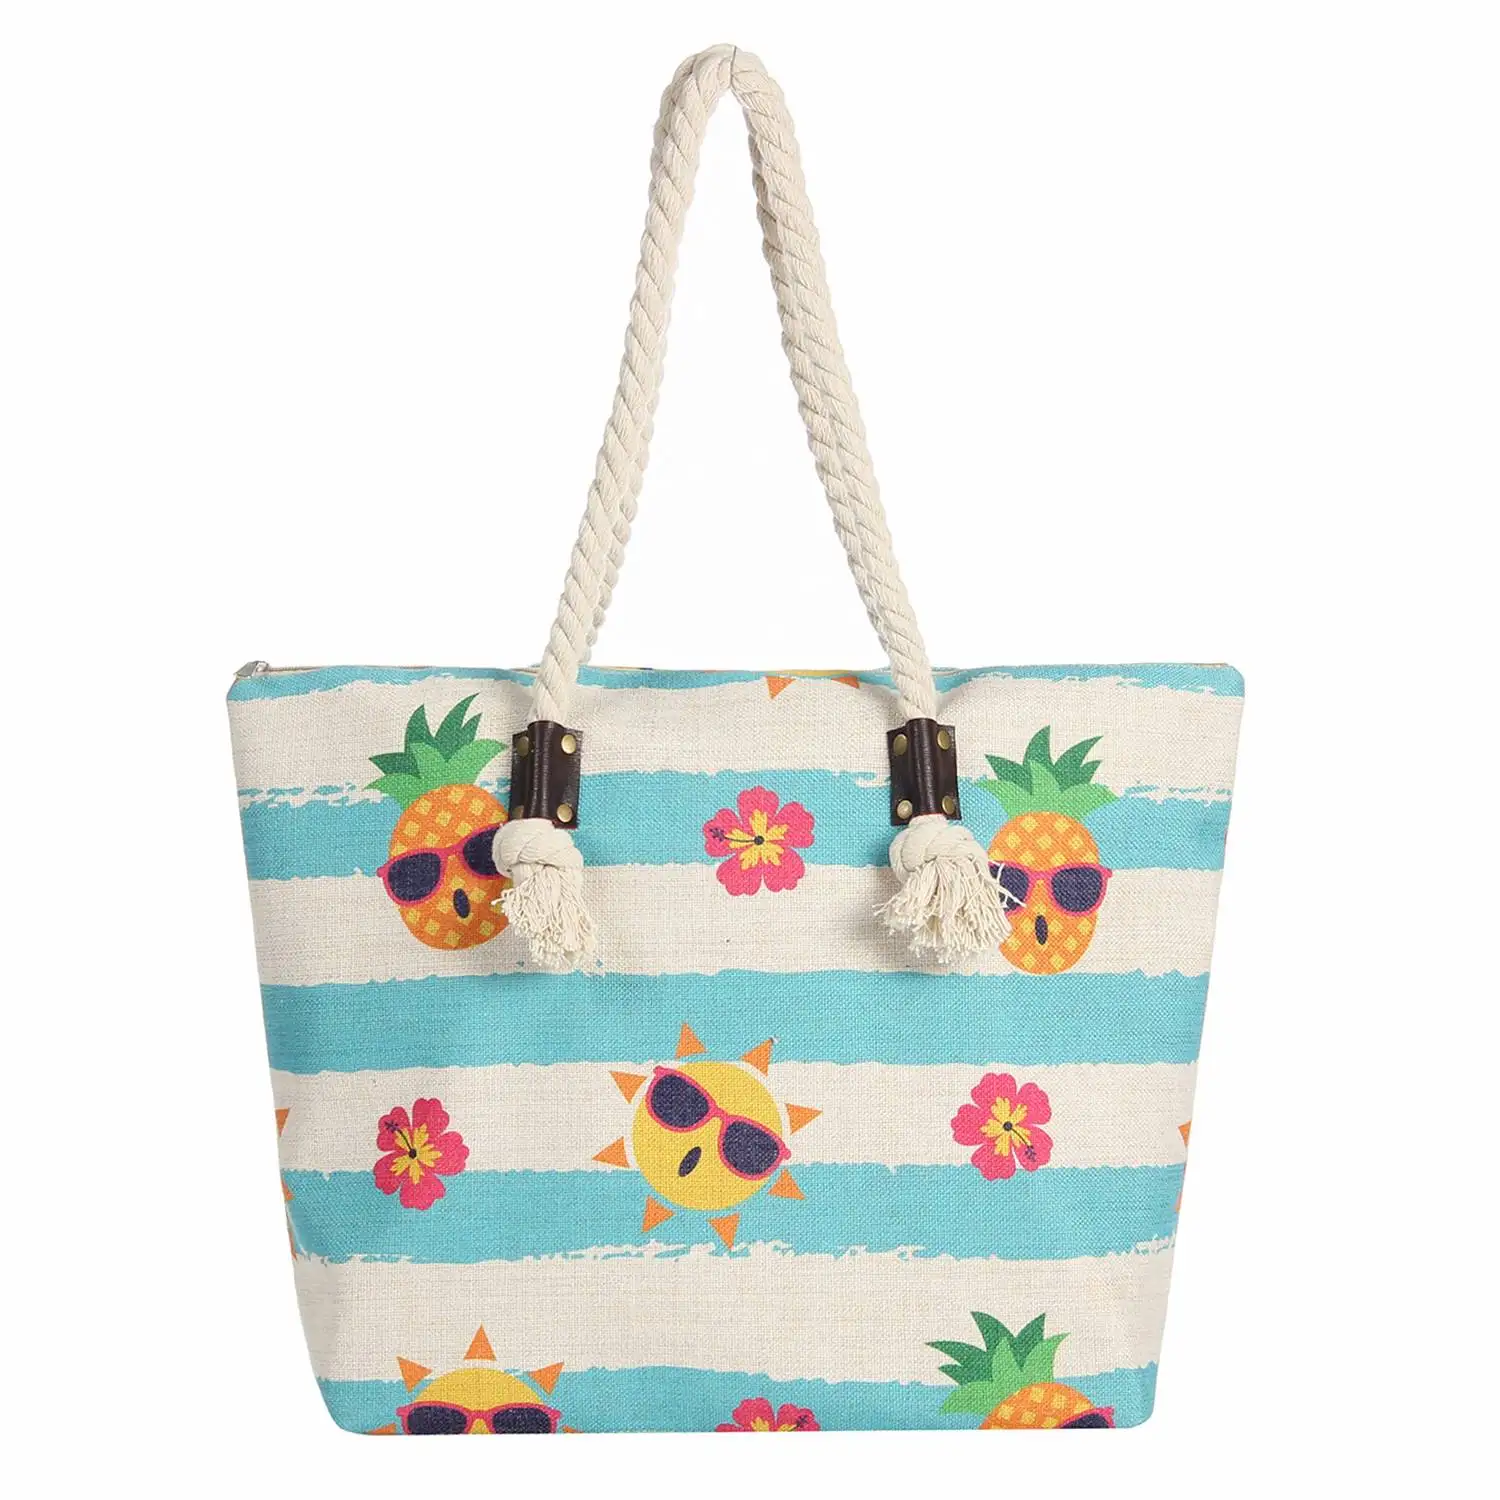 Large Canvas Striped Beach Bag With Zipper Top Closure Waterproof Lining Tote Shoulder Bag For Gym Beach Travel